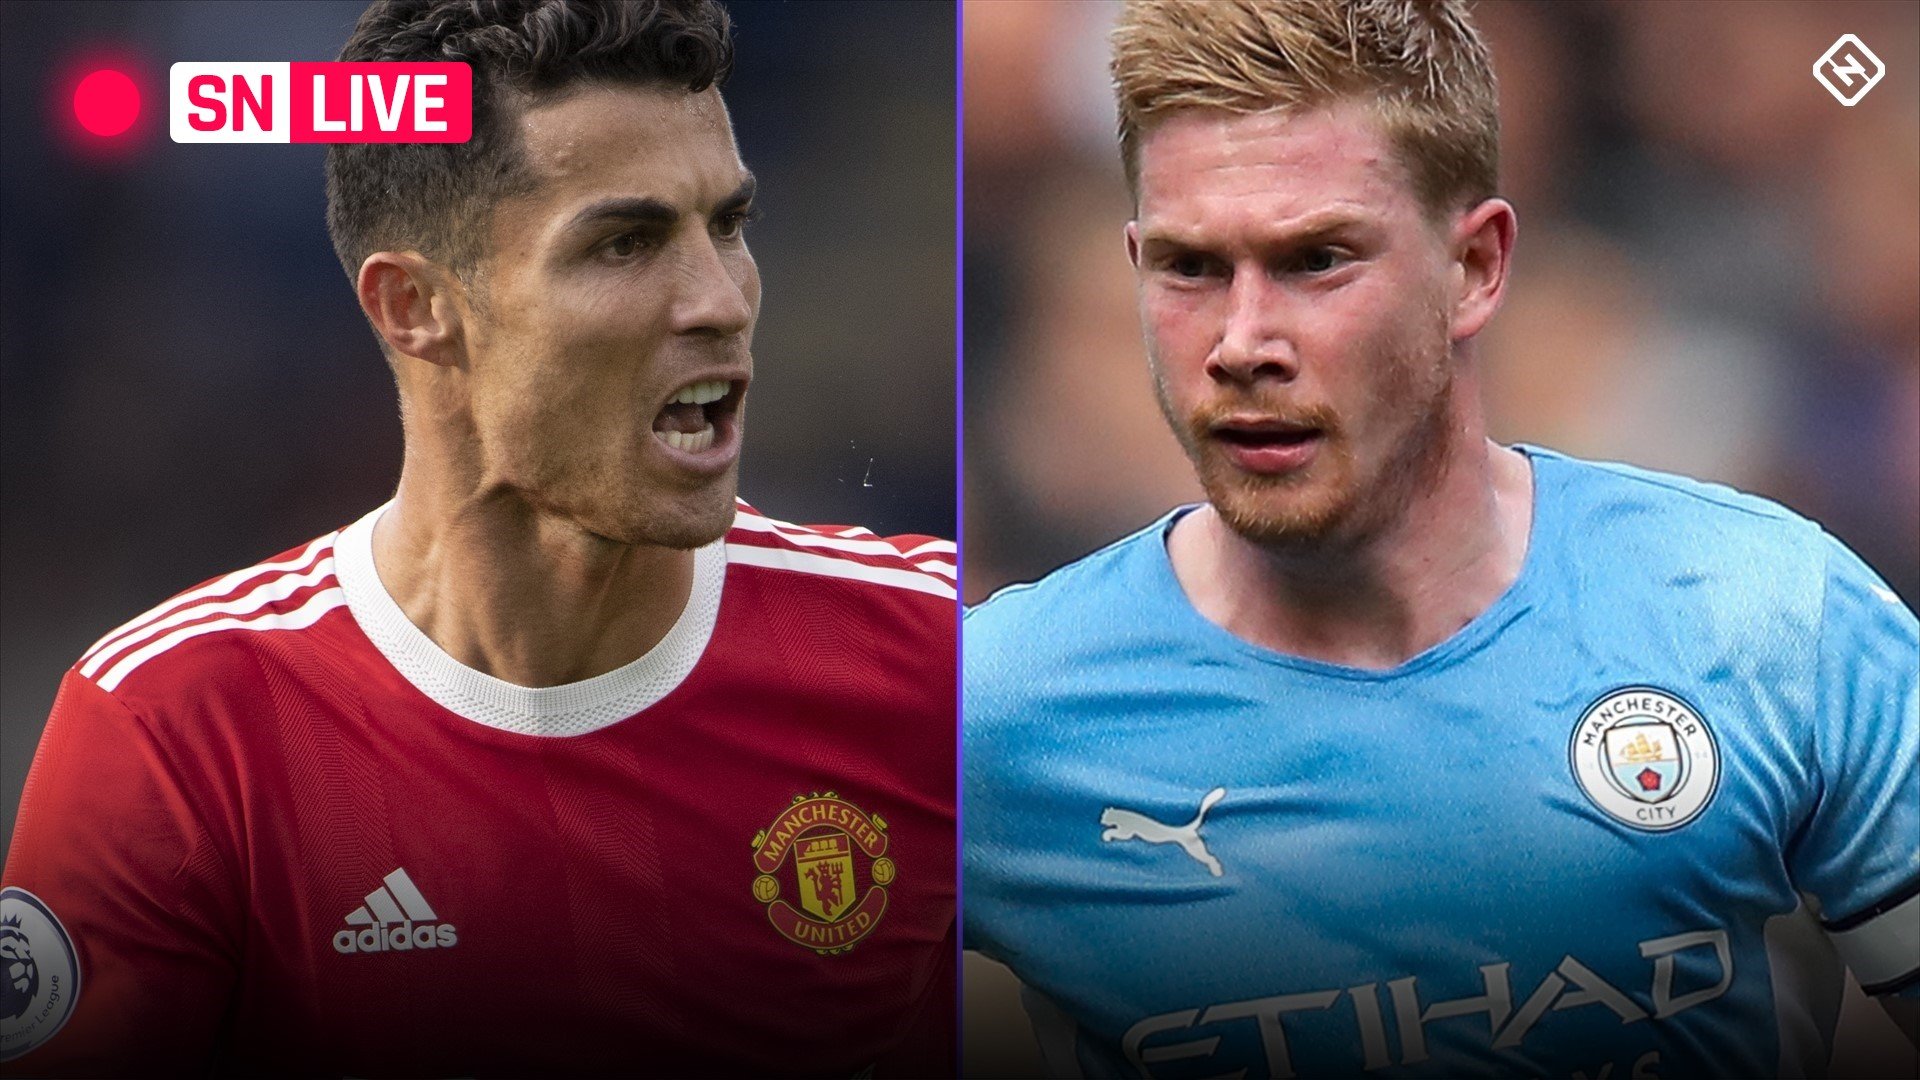 Manchester United vs Manchester City live score updates highlights from